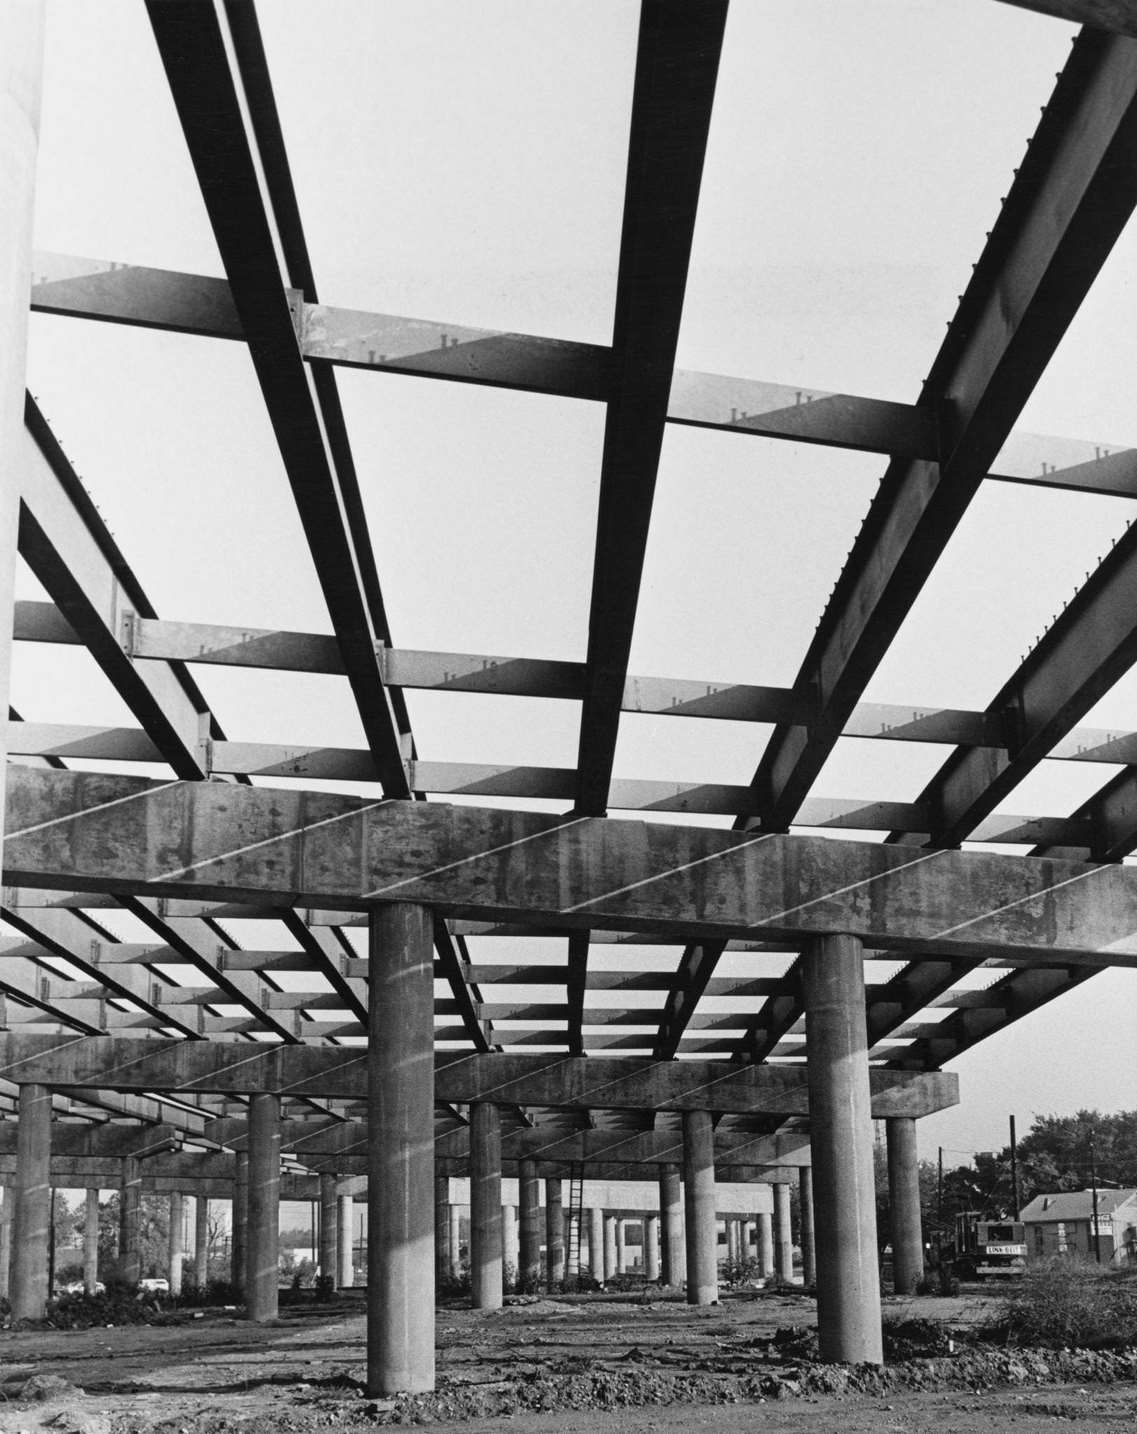 View up through the uncompleted steel framework of a bridge or road flyover, raised on reinforced concrete pillars, under construction in Dallas, Texas, 1955.